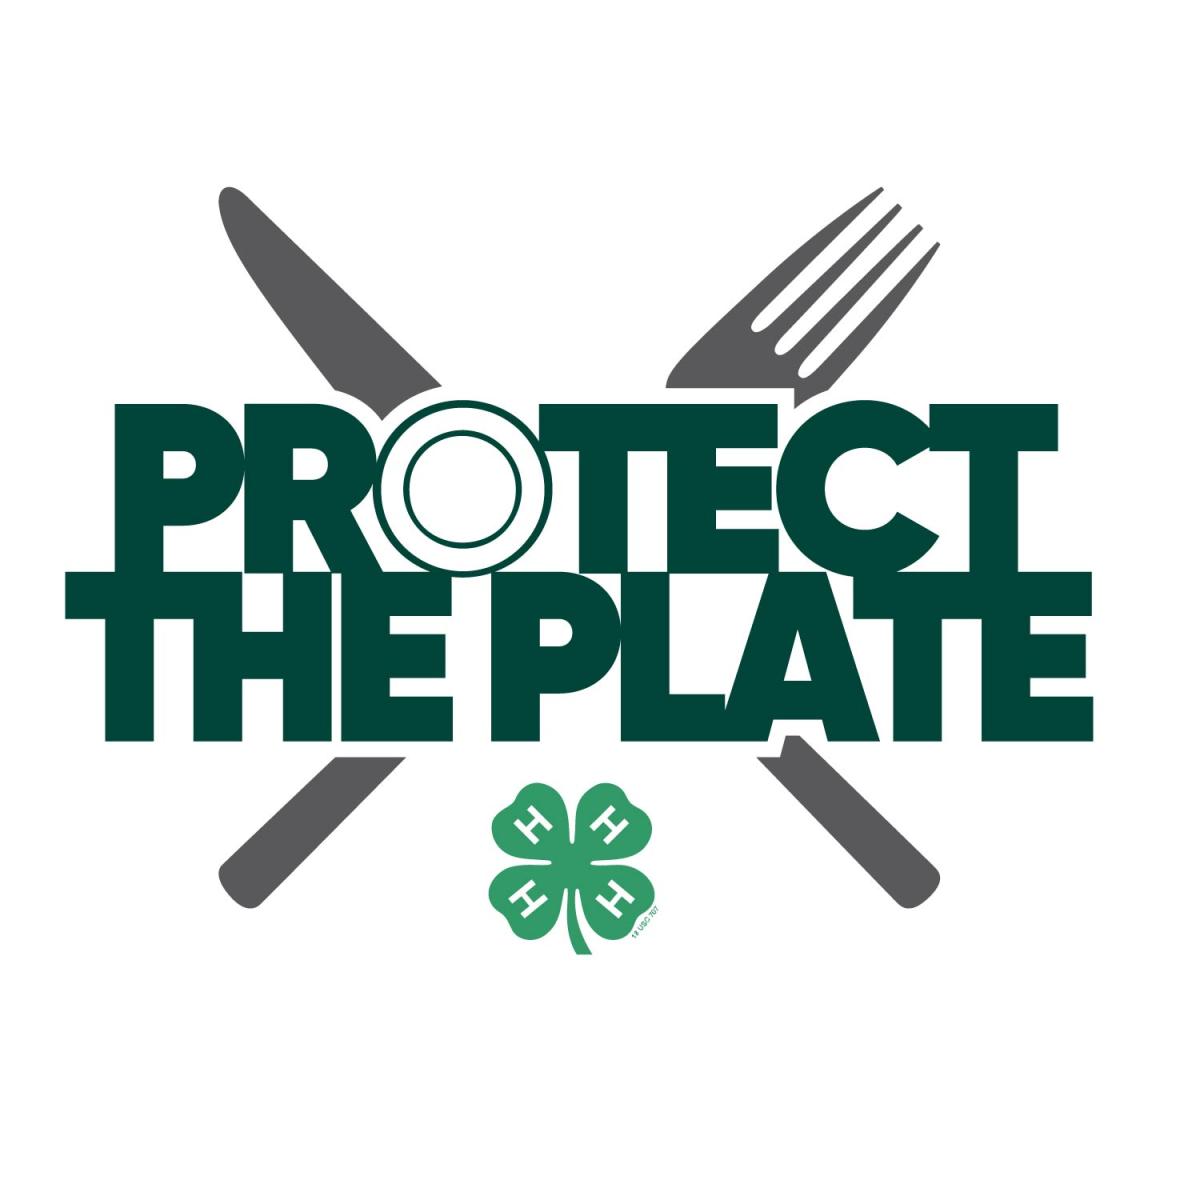 Protect the Plate